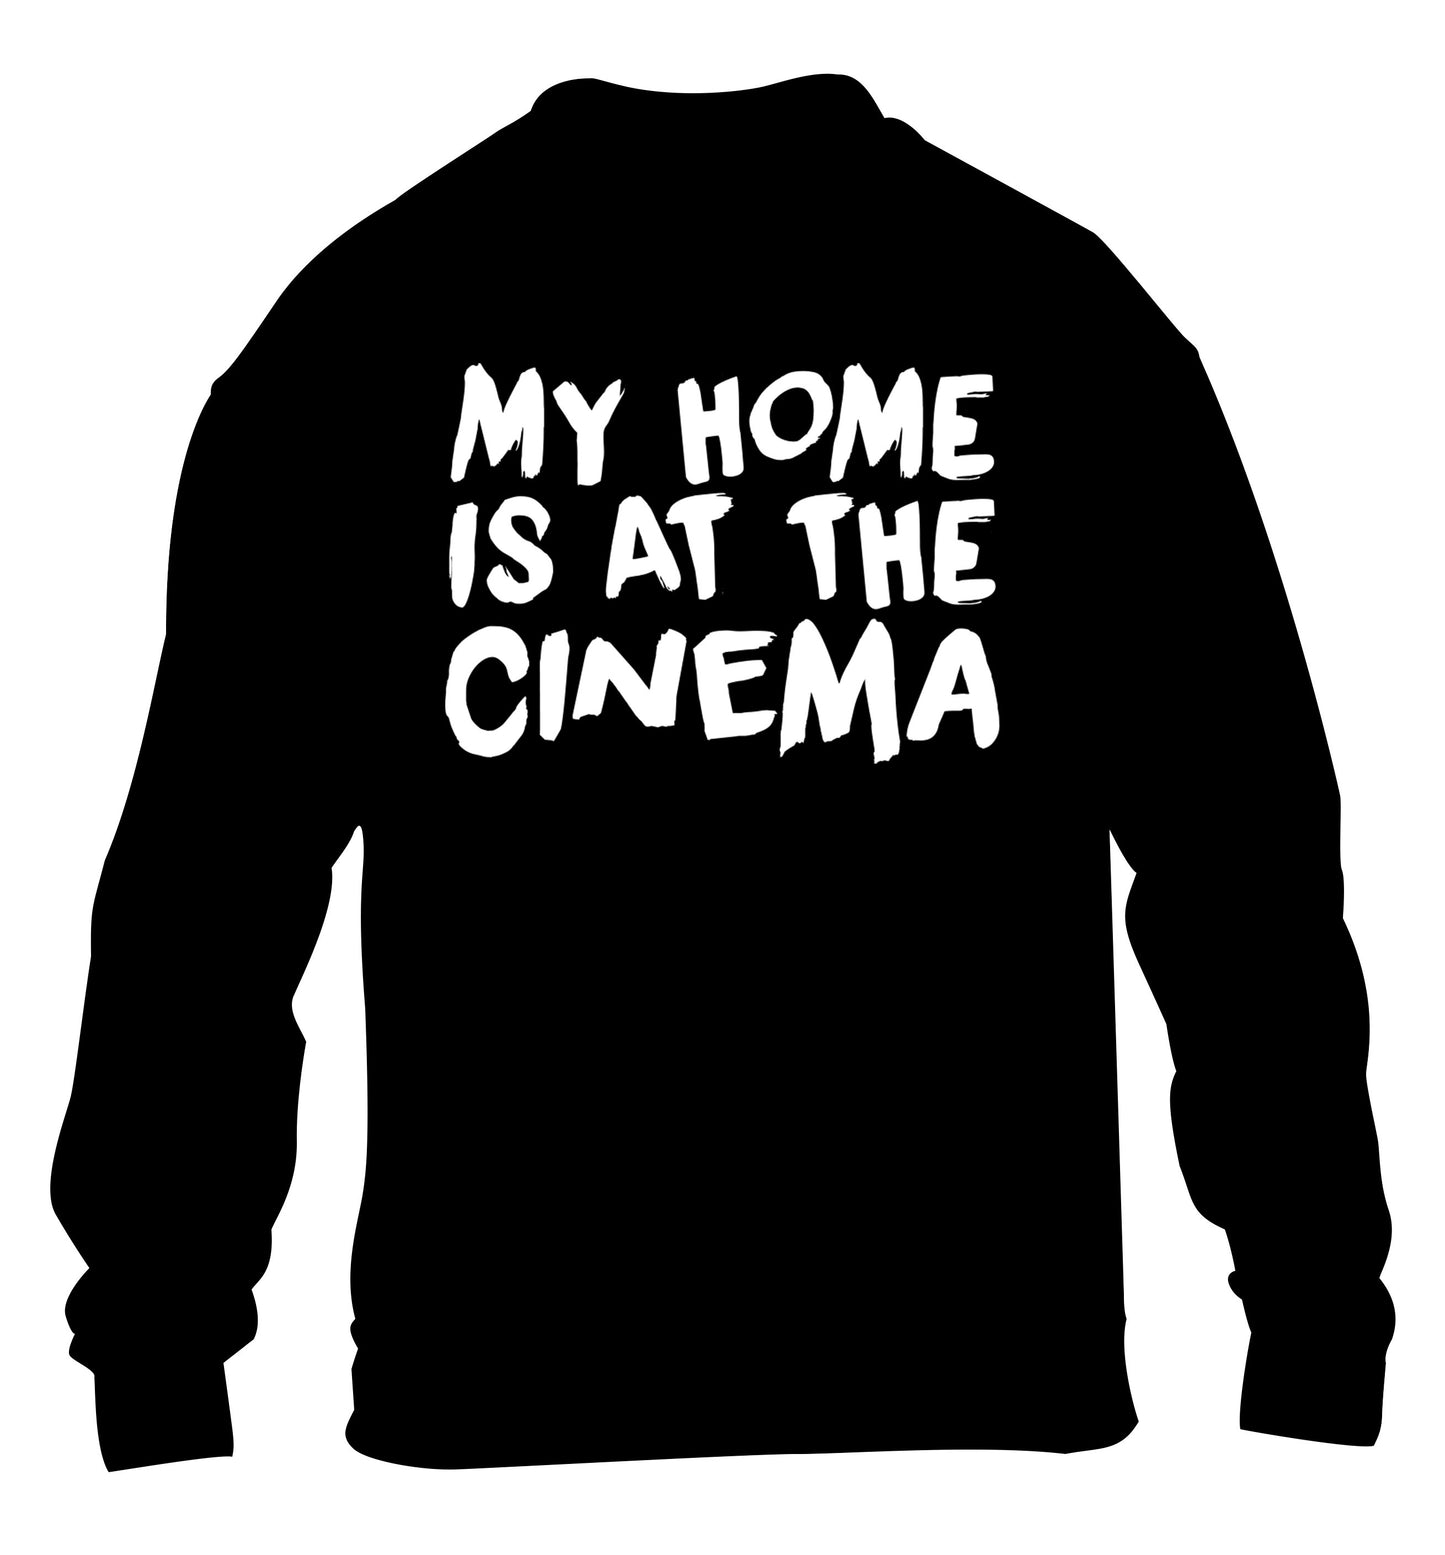 My home is at the cinema children's black sweater 12-14 Years